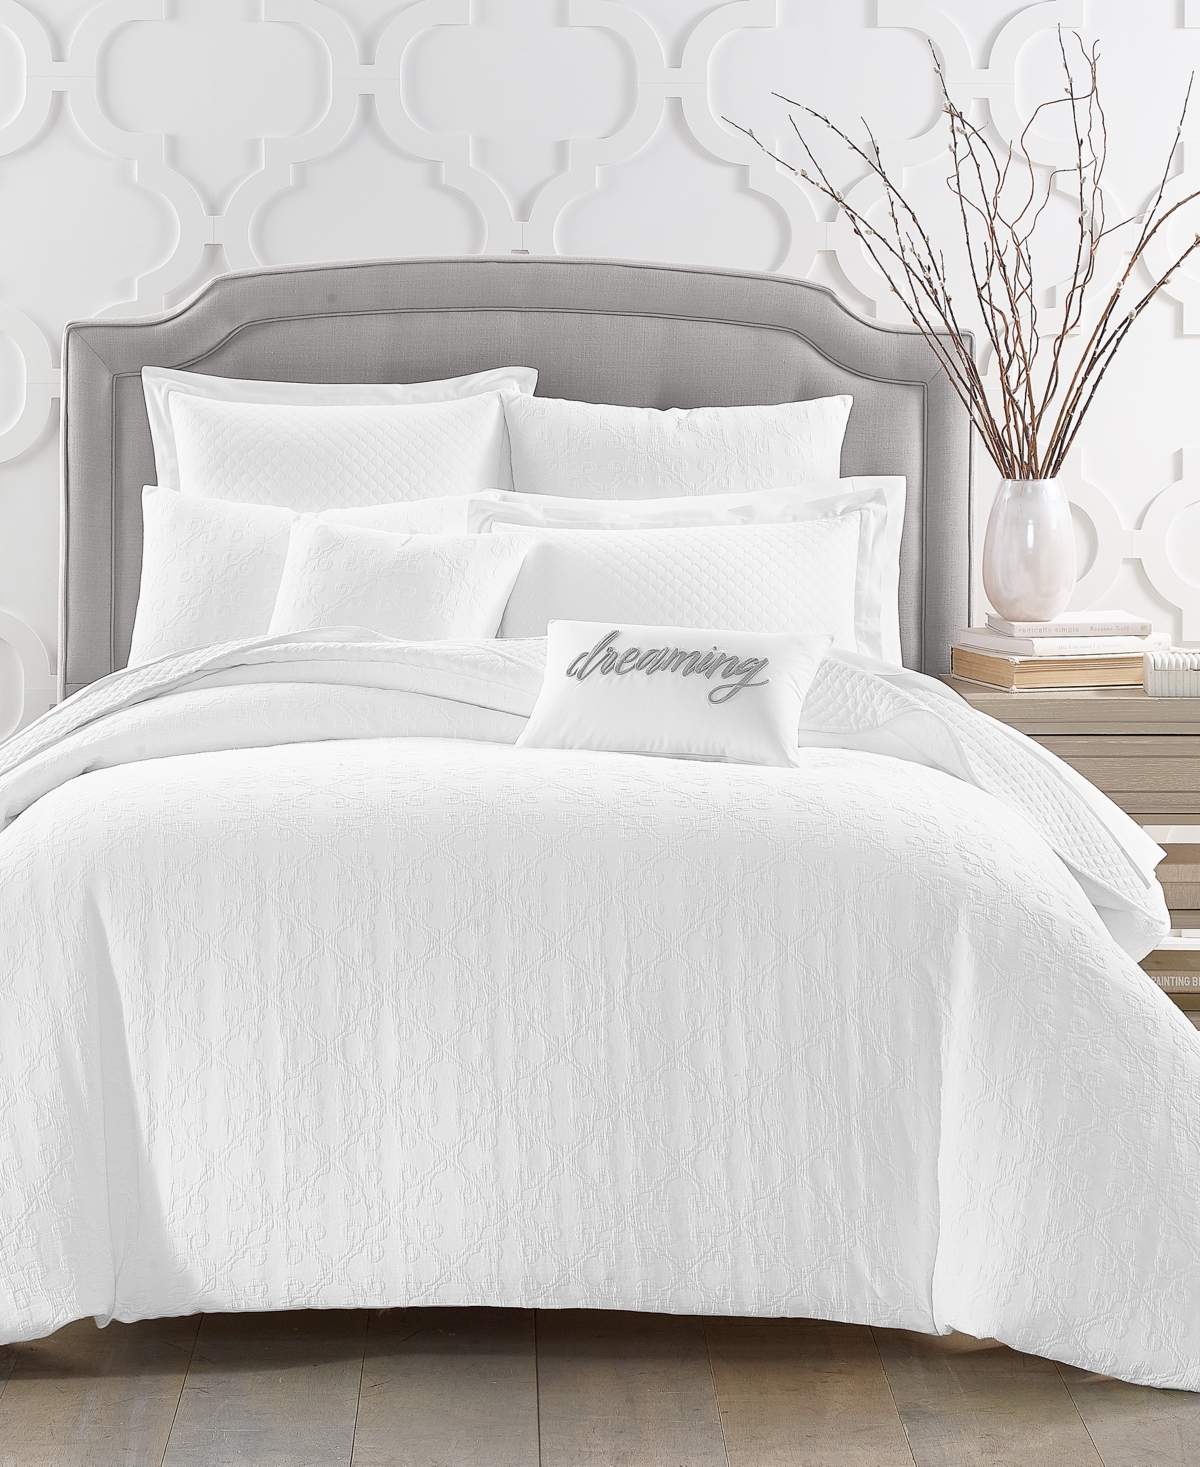 Charter Club Damask Designs Woven Tile 3-pc. Comforter Set, King, Created For Macy's In White